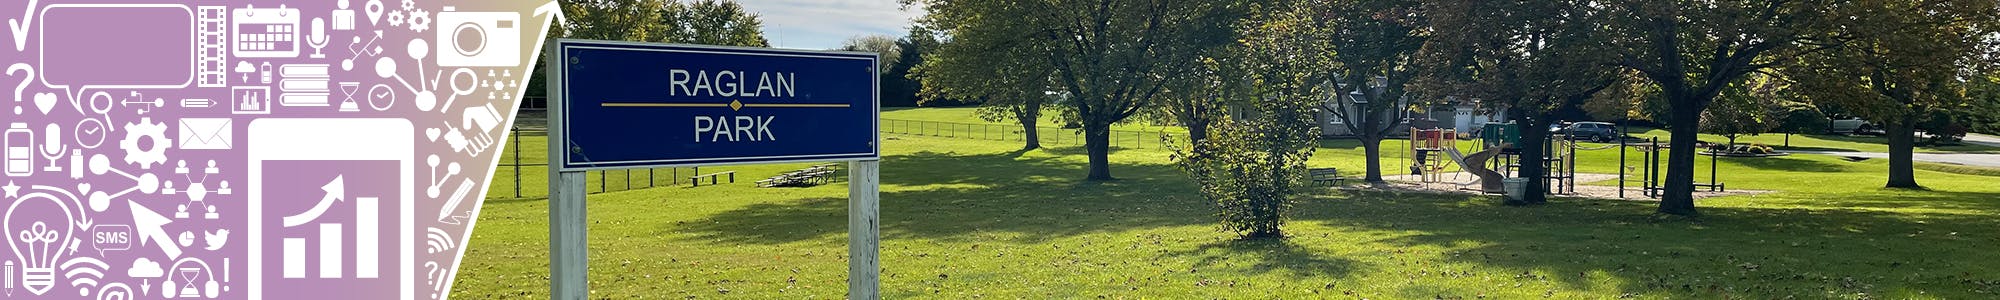 Image of Raglan Park sign at the forefront with the currently park playground and trees in the background